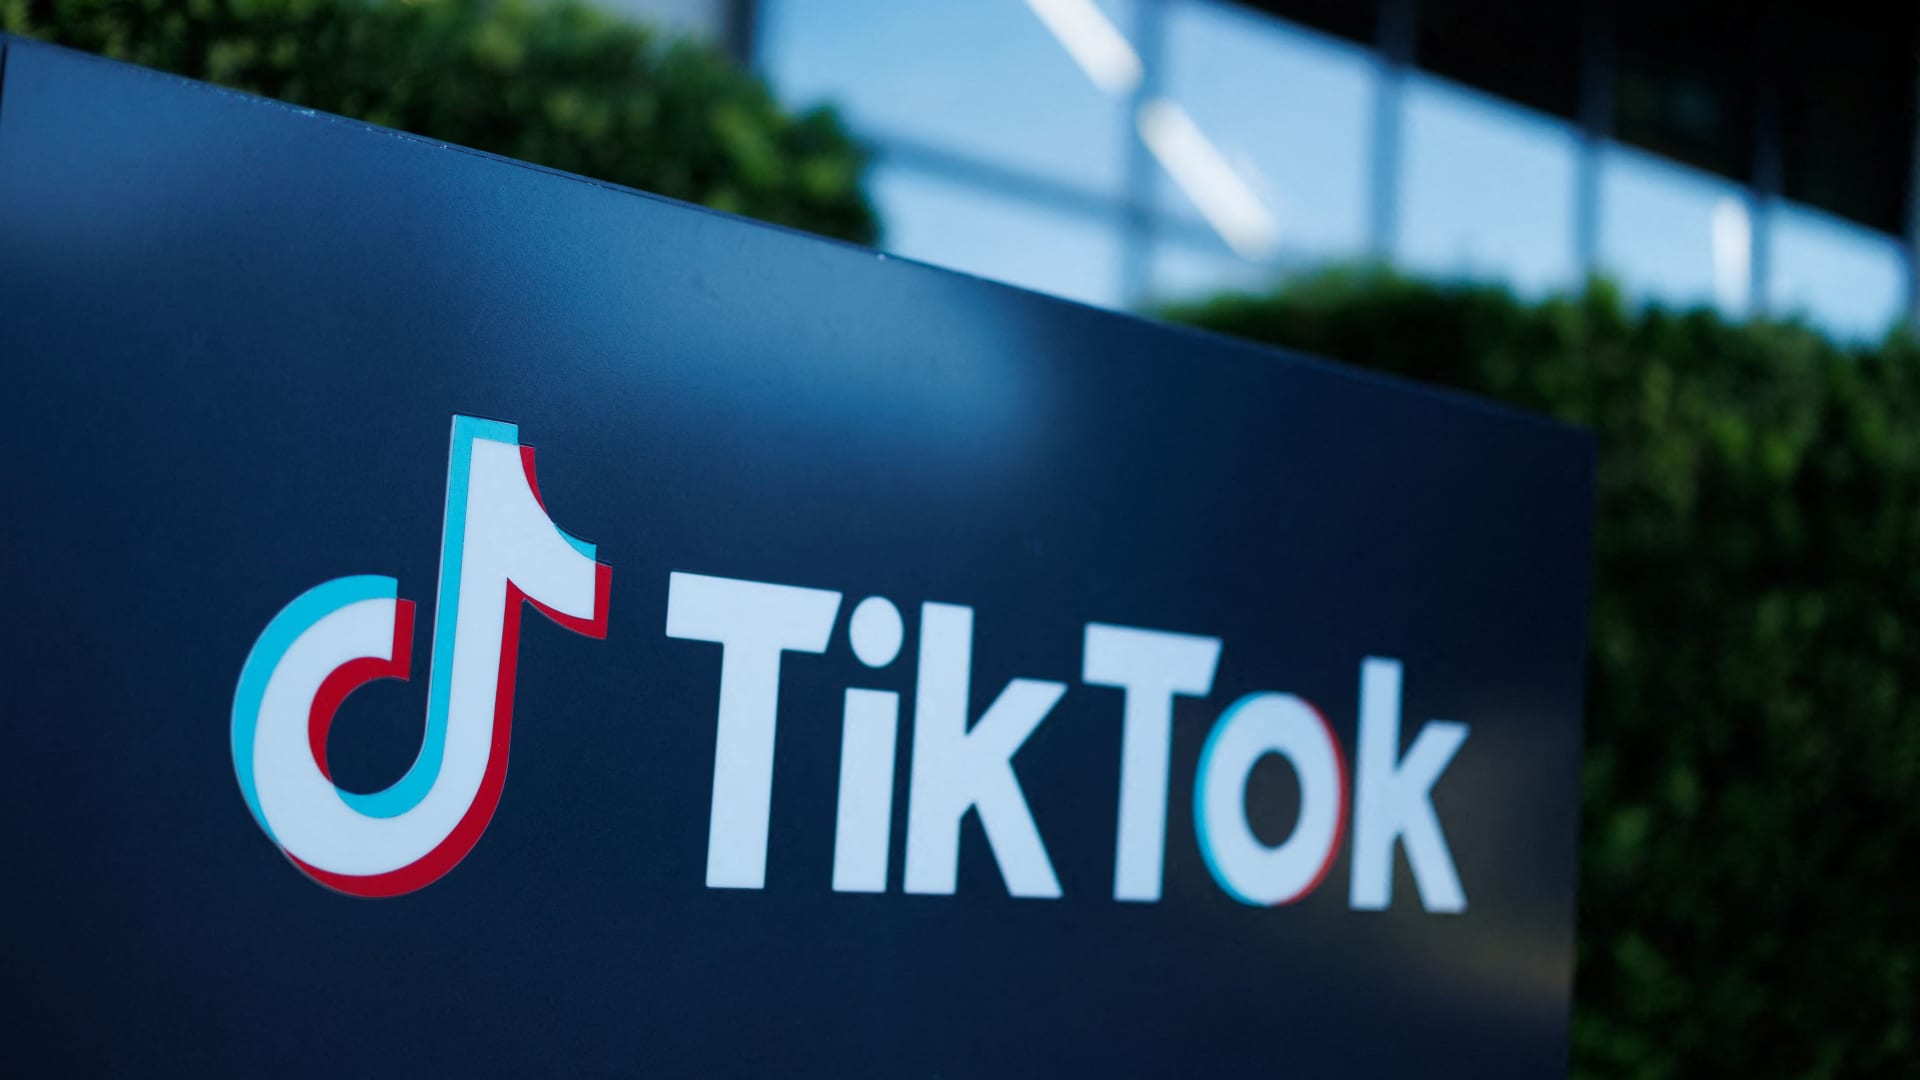 Kevin O’Leary on why he wants to buy TikTok